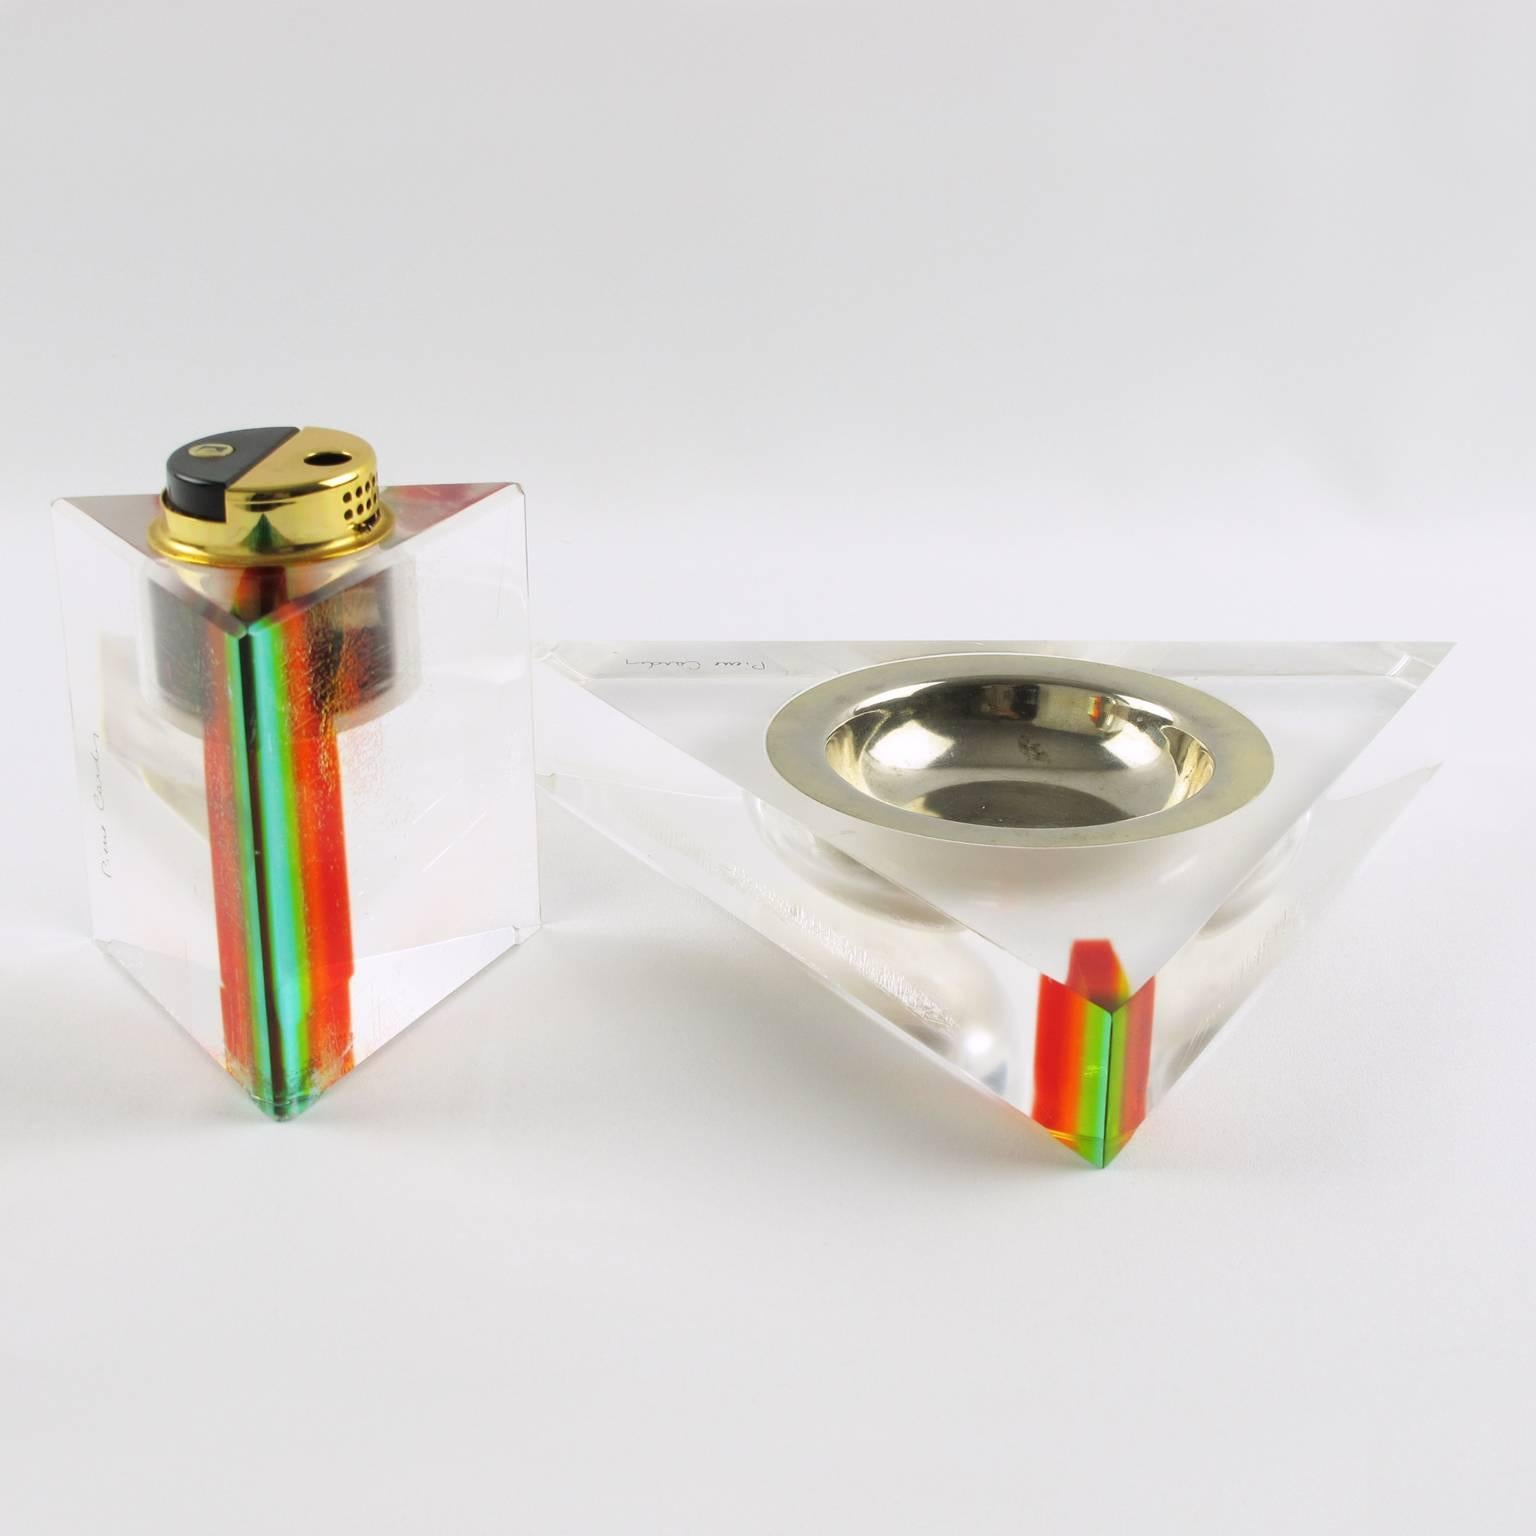 Rare 1970s French designer Pierre Cardin smoking desk set. Featuring ashtray and lighter in crystal clear Lucite with rainbow colors inclusion. Set is build with large geometric ashtray and gas lighter. Each piece is marked: Pierre Cardin with